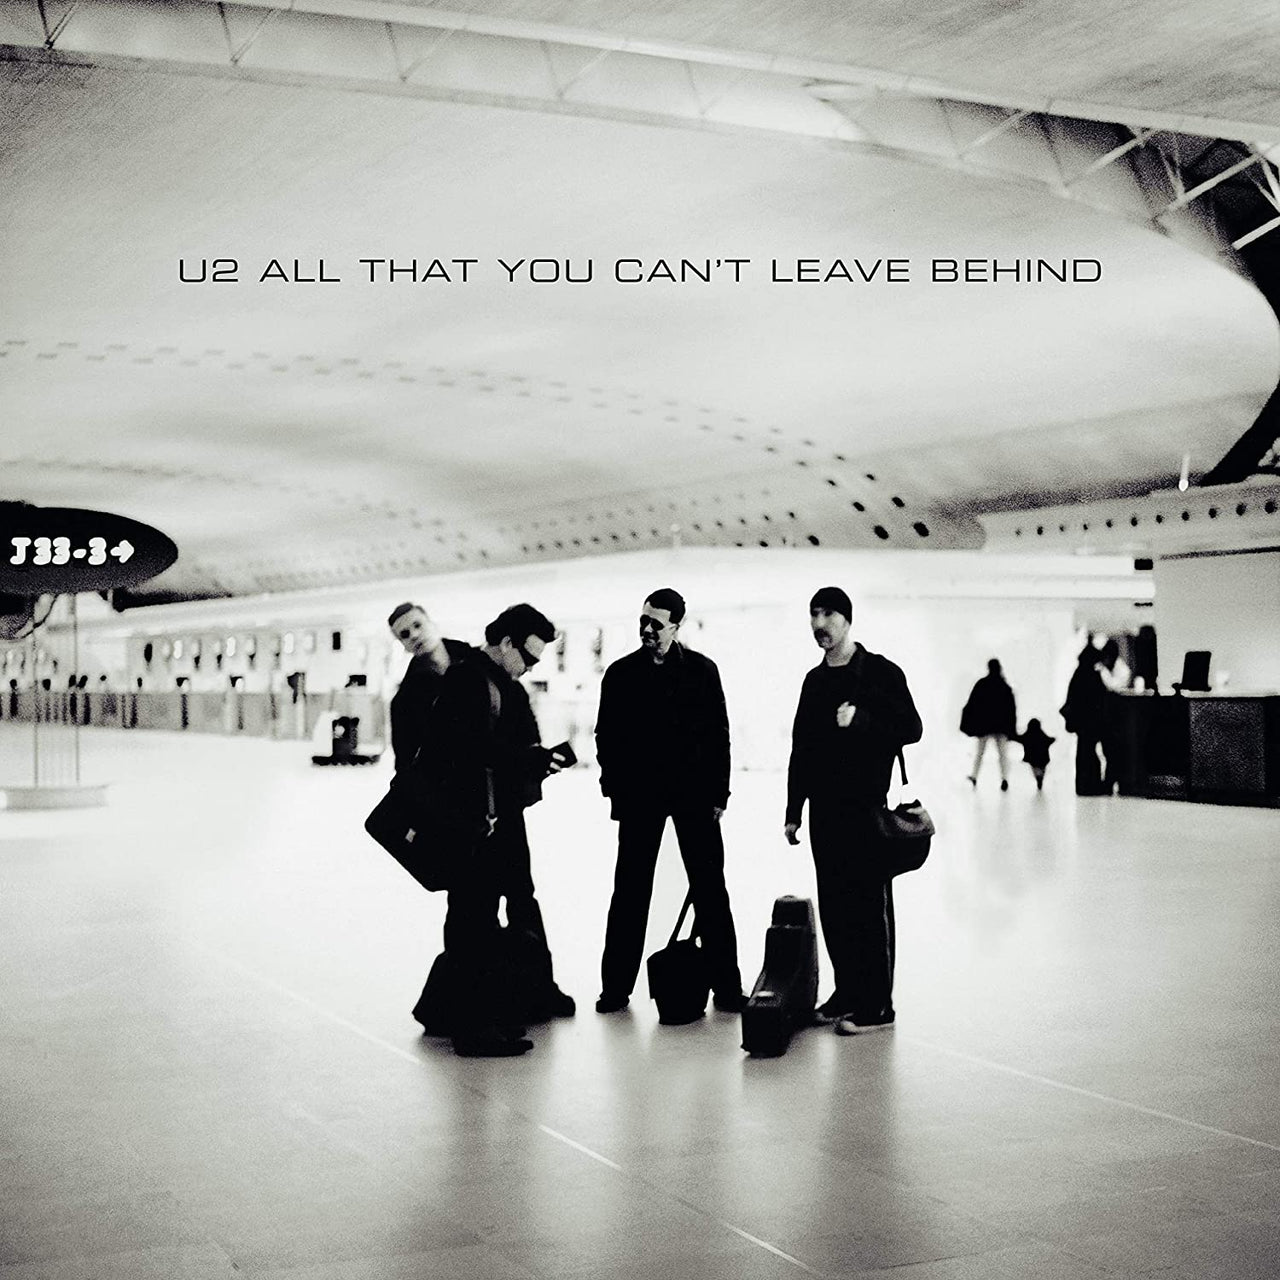 U2: All That You Can't Leave Behind - 20th Anniversary Vinyl LP